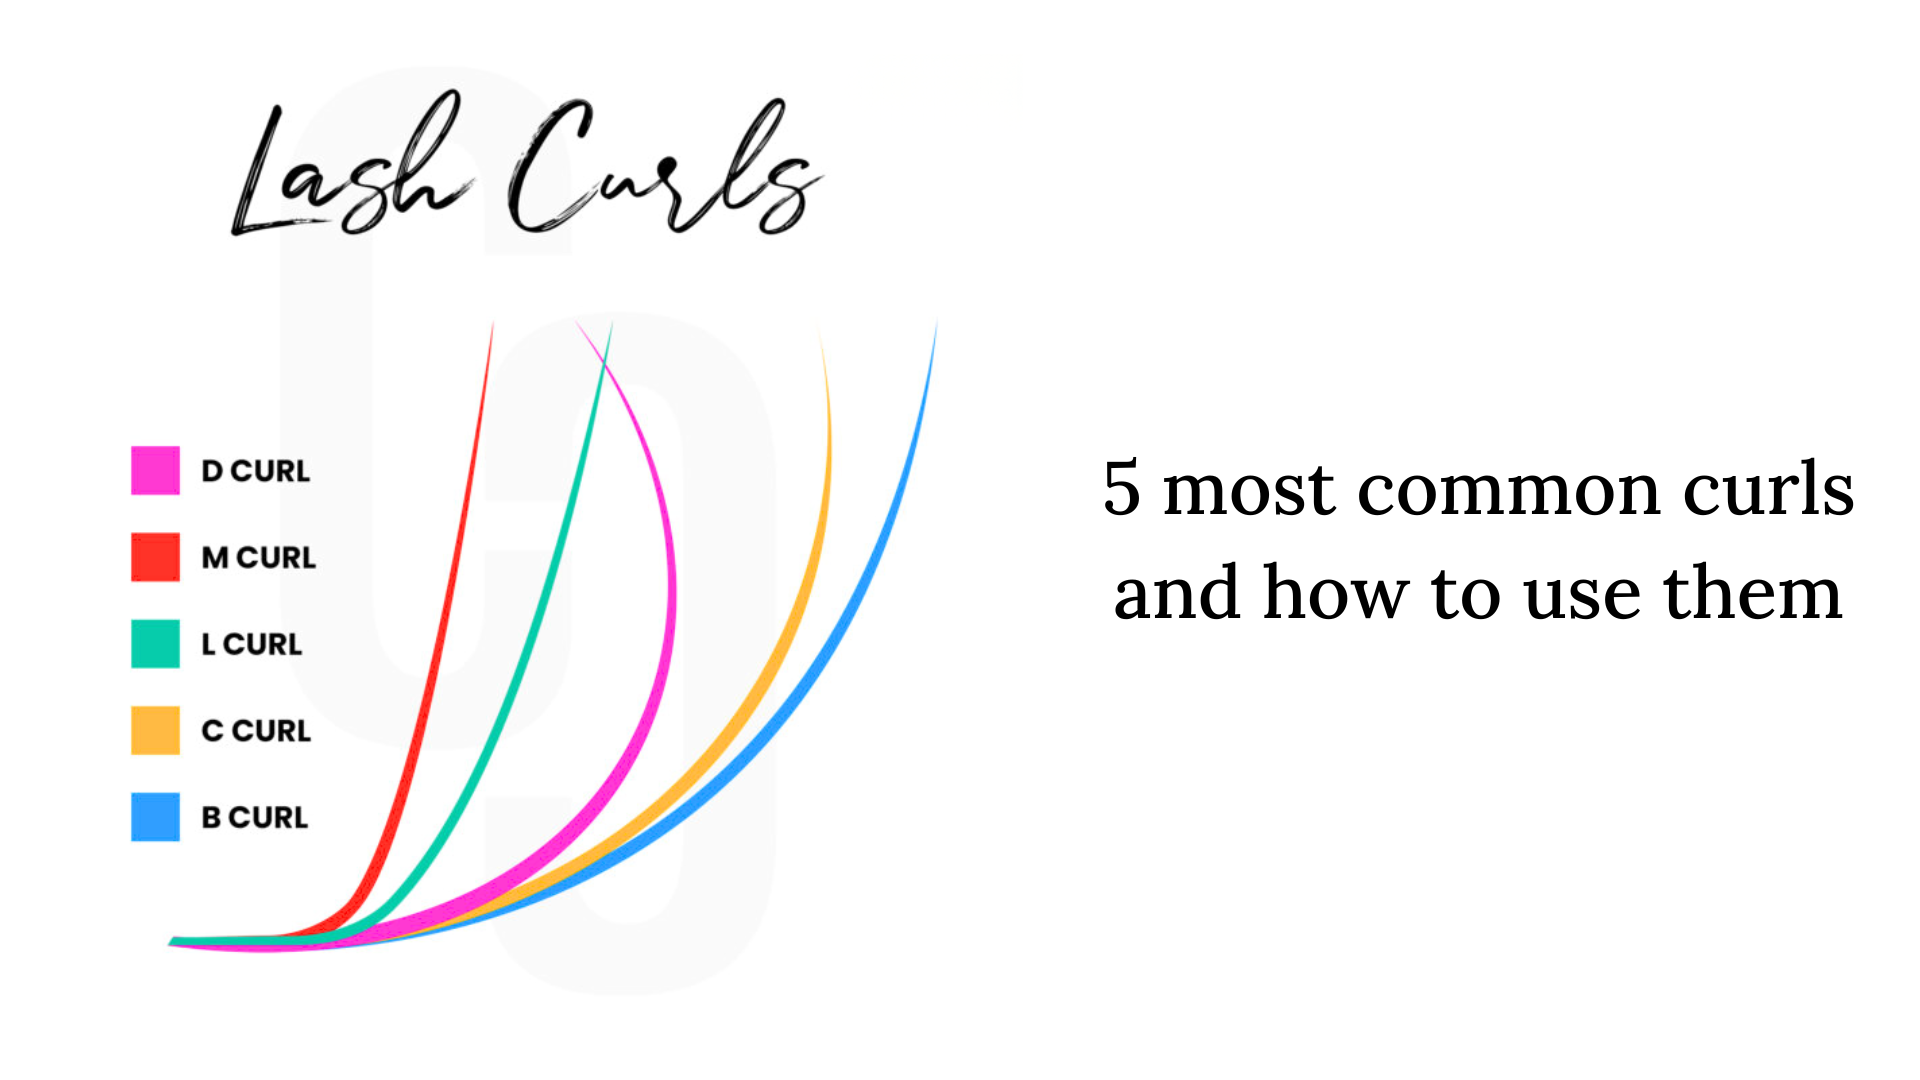 5 most common curls and how to use them